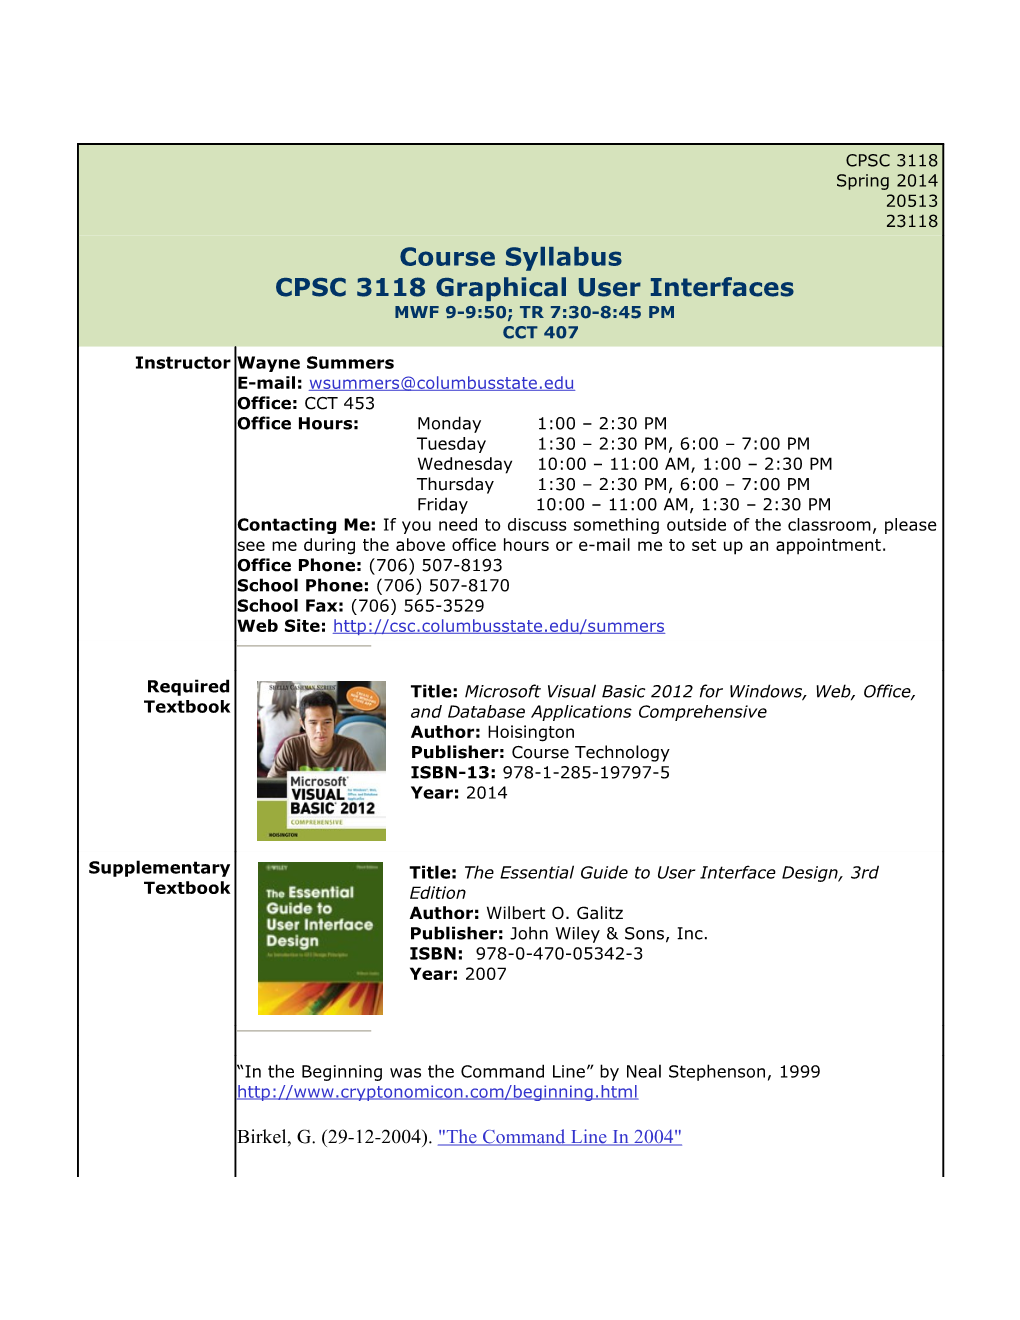 Course Syllabuscpsc 3118 Graphical User Interfacesmwf 9-9:50; TR7:30-8:45 PMCCT 407